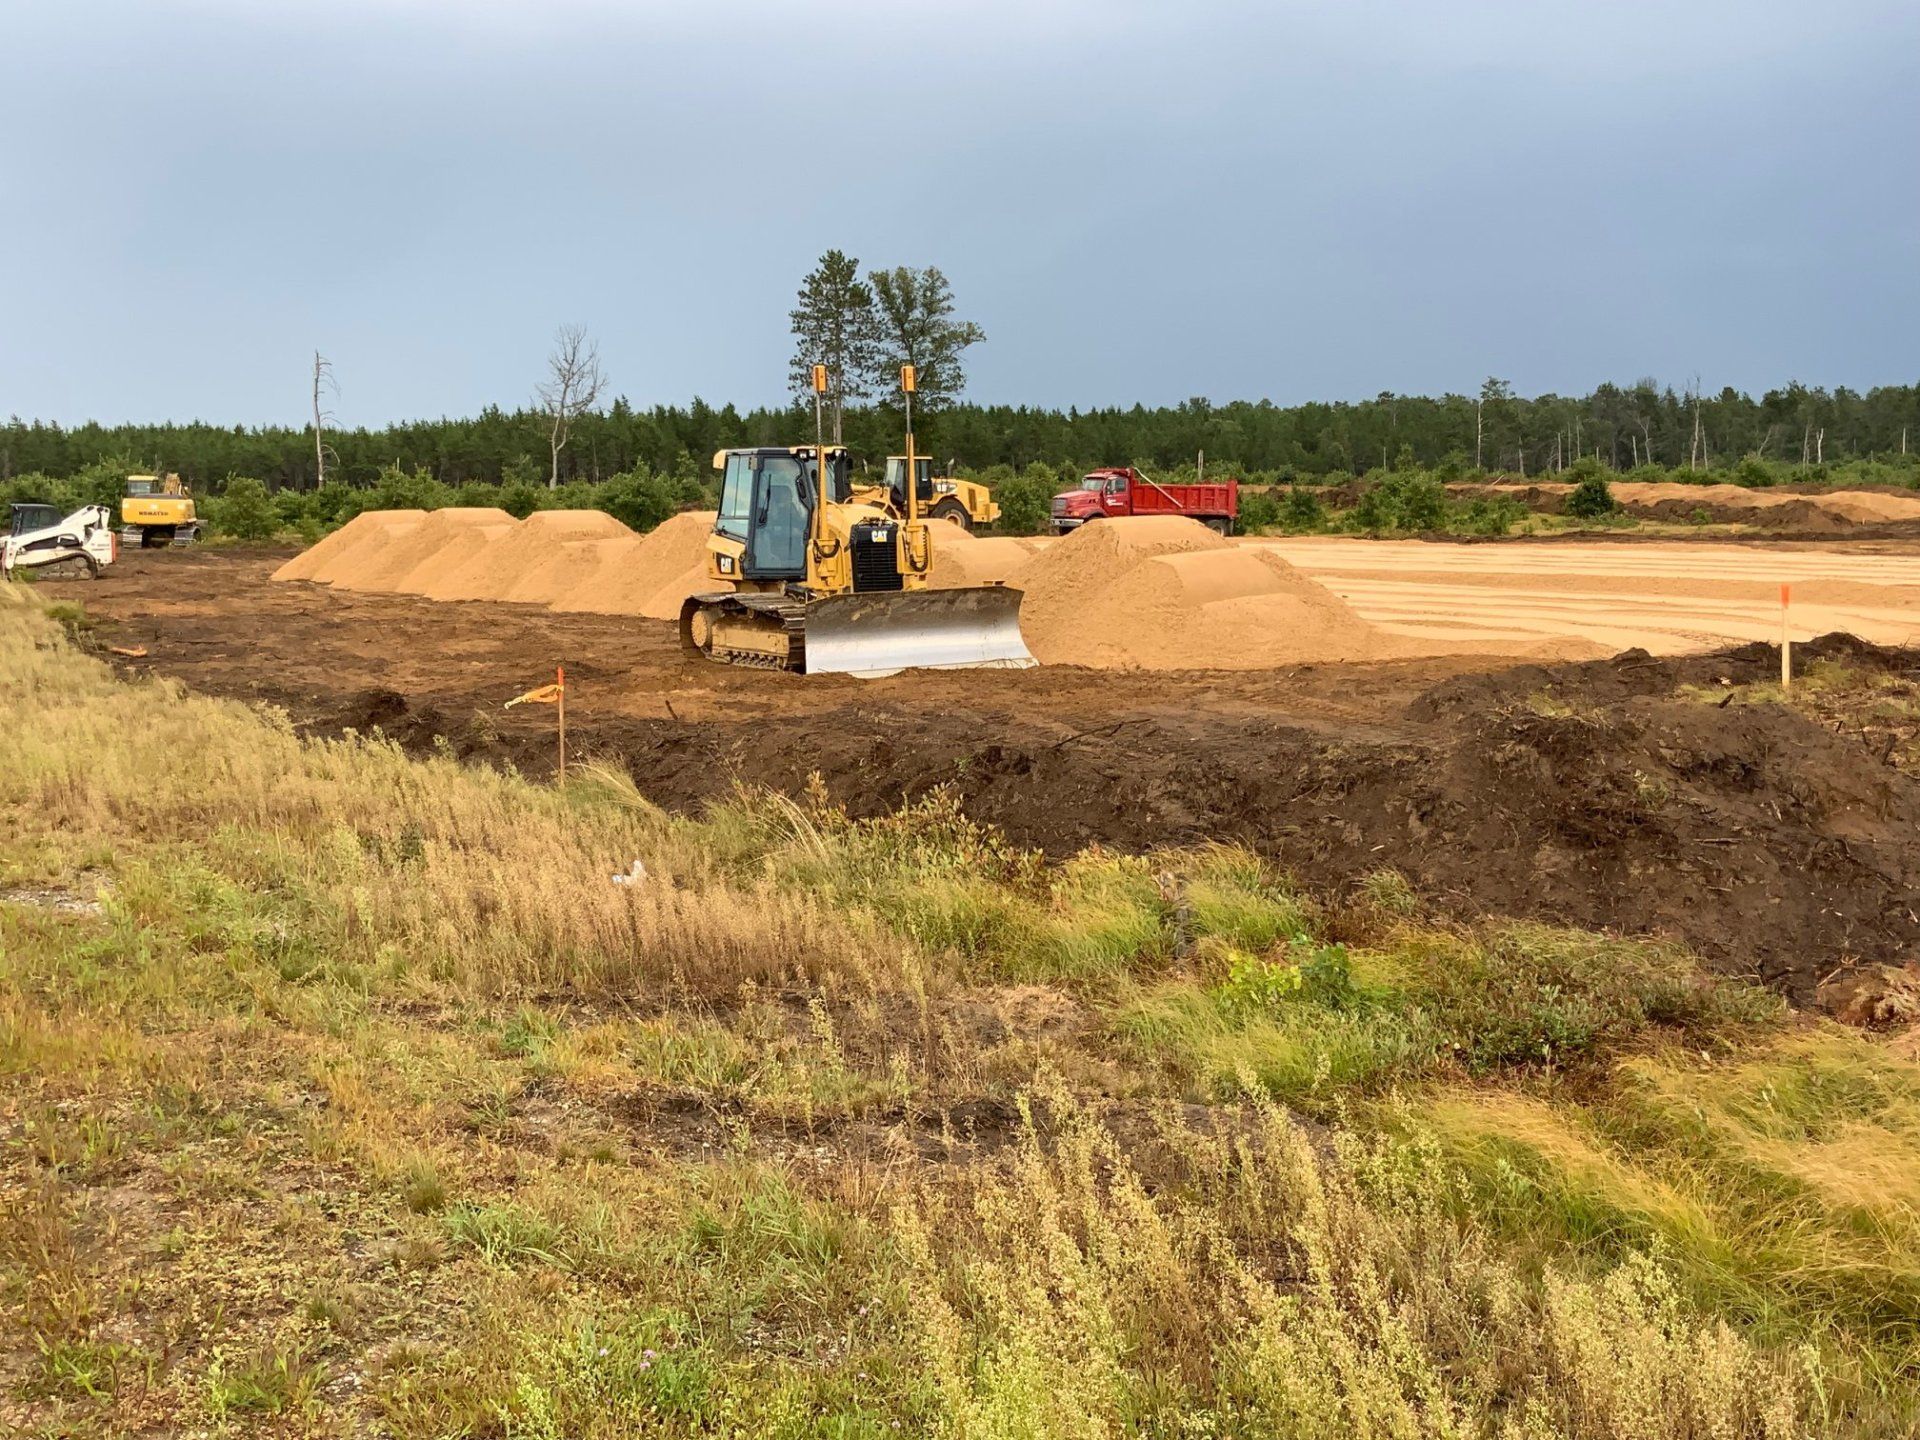 A bulldozer is moving dirt in a field.